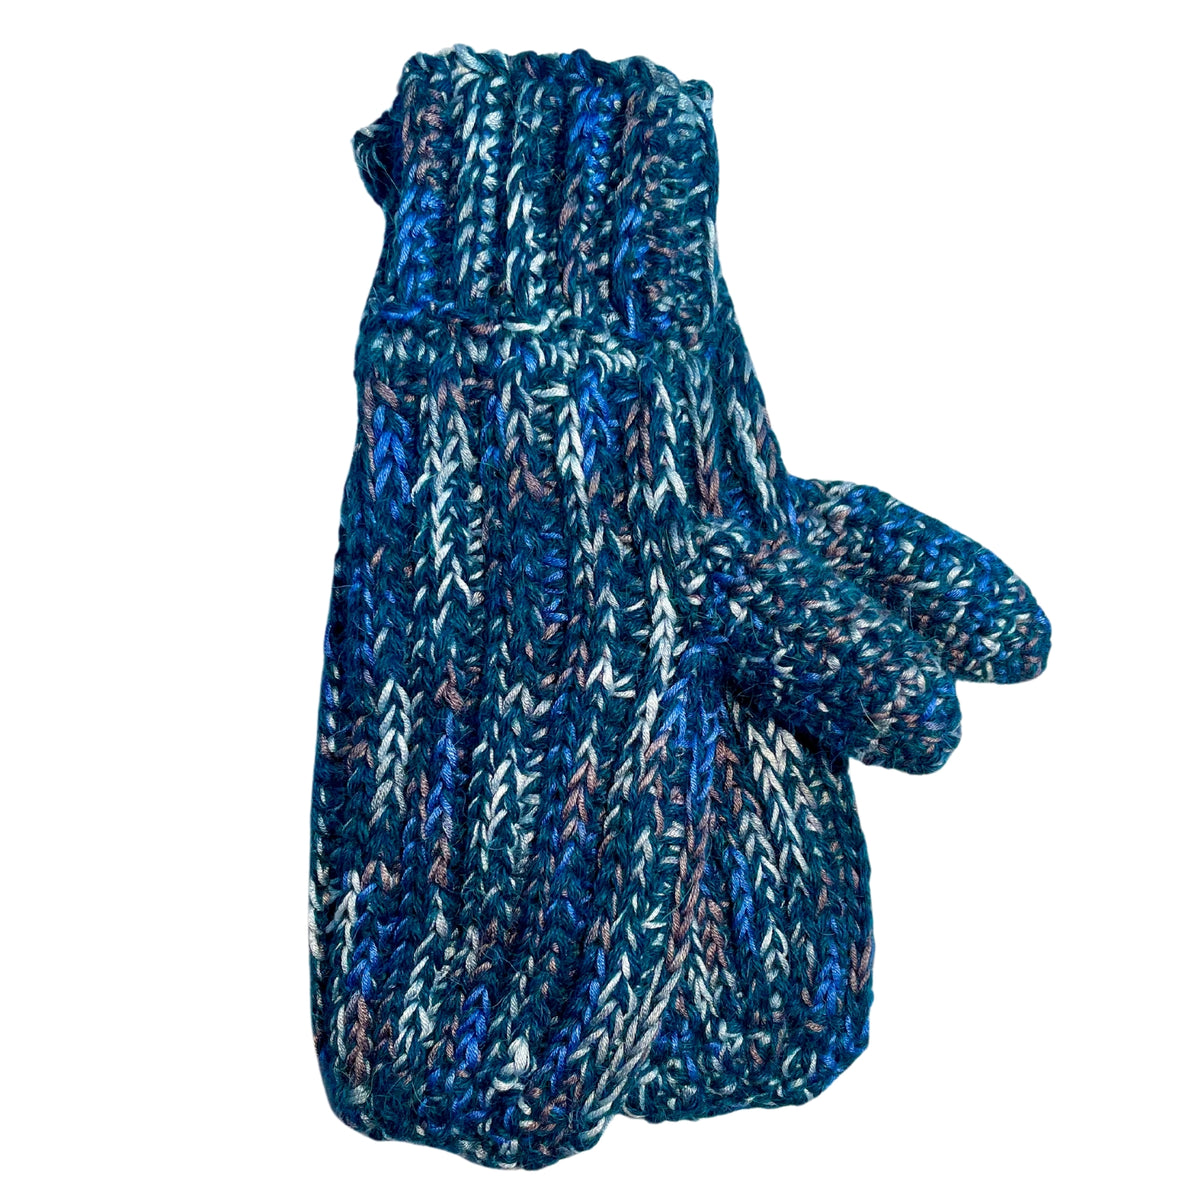 Alpacas of Montana ocean blue, dark turquoise, cobalt, cerulean, gray, and white colored cozy soft warm handmade knitted crochet ribbed mittens made in Montana out of alpaca yarn and bamboo yarn.